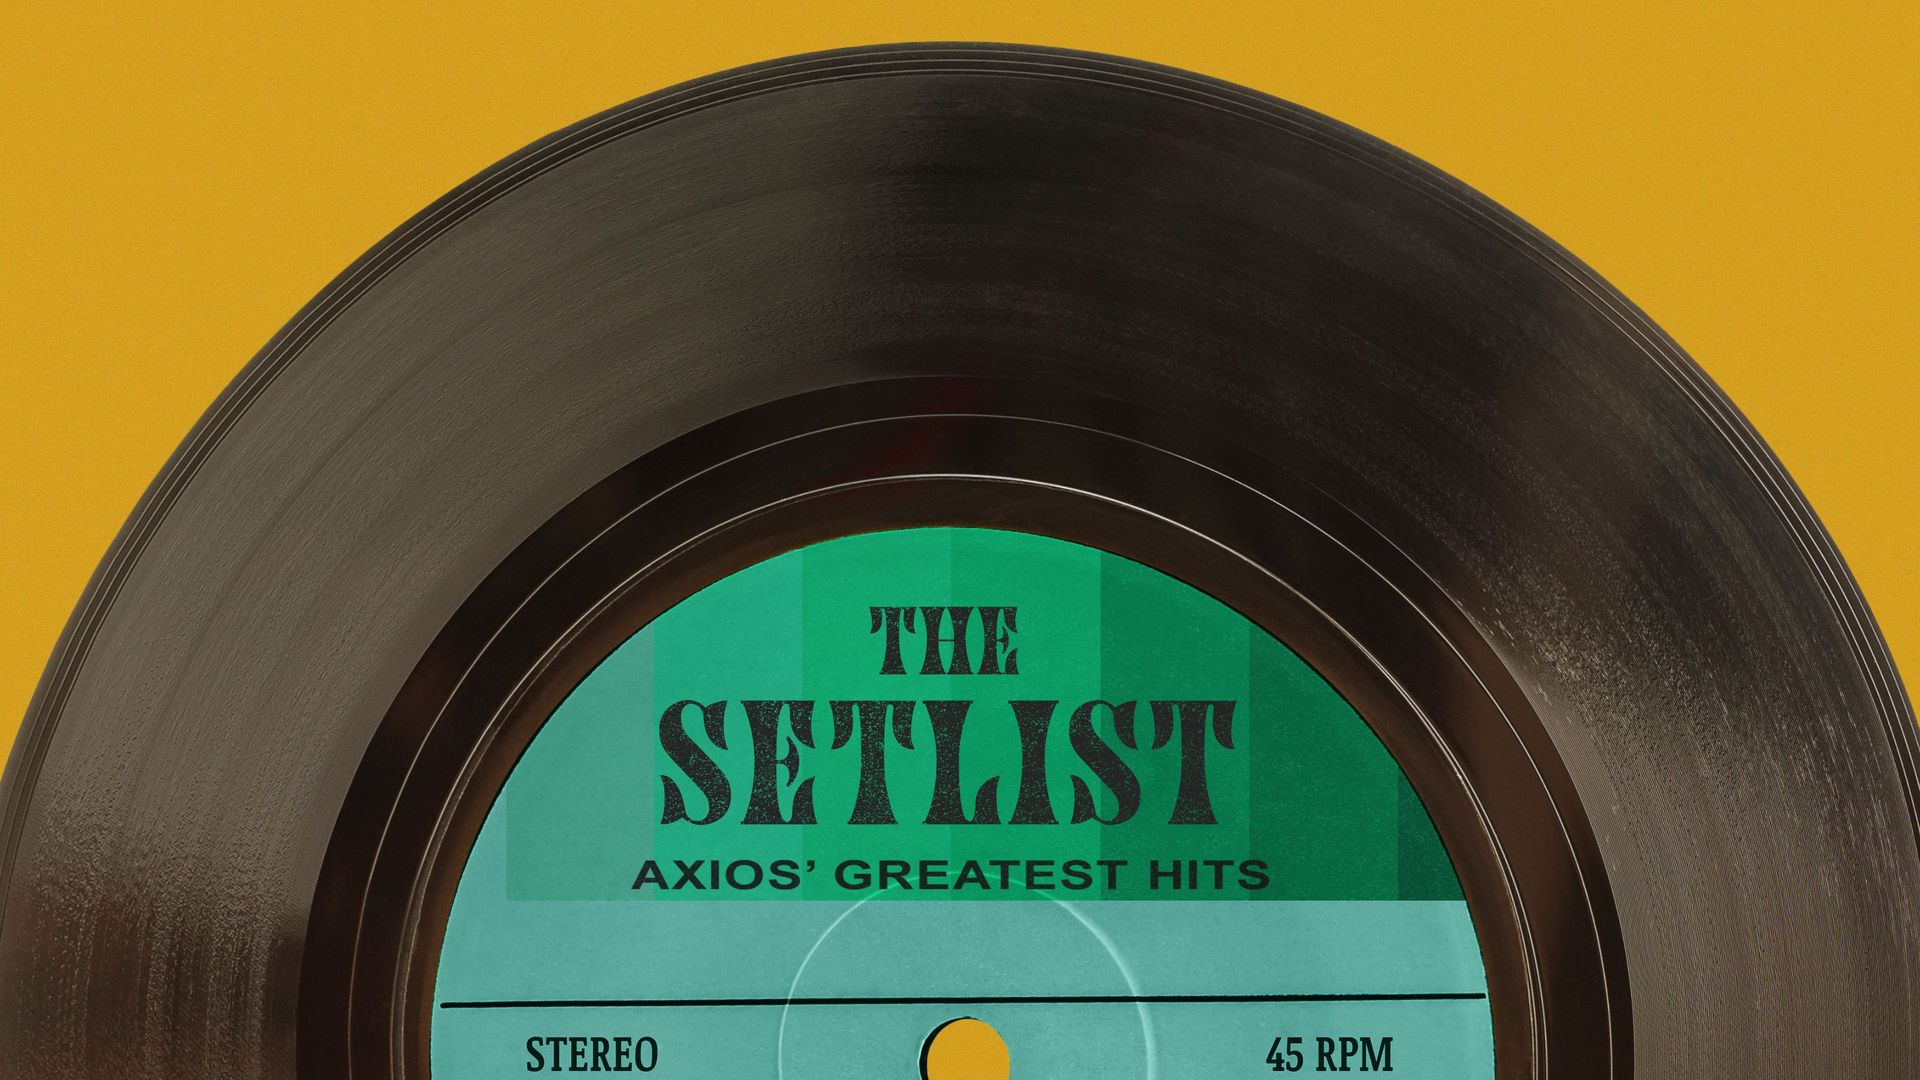 Illustration of a vinyl record labeled "The Setlist"